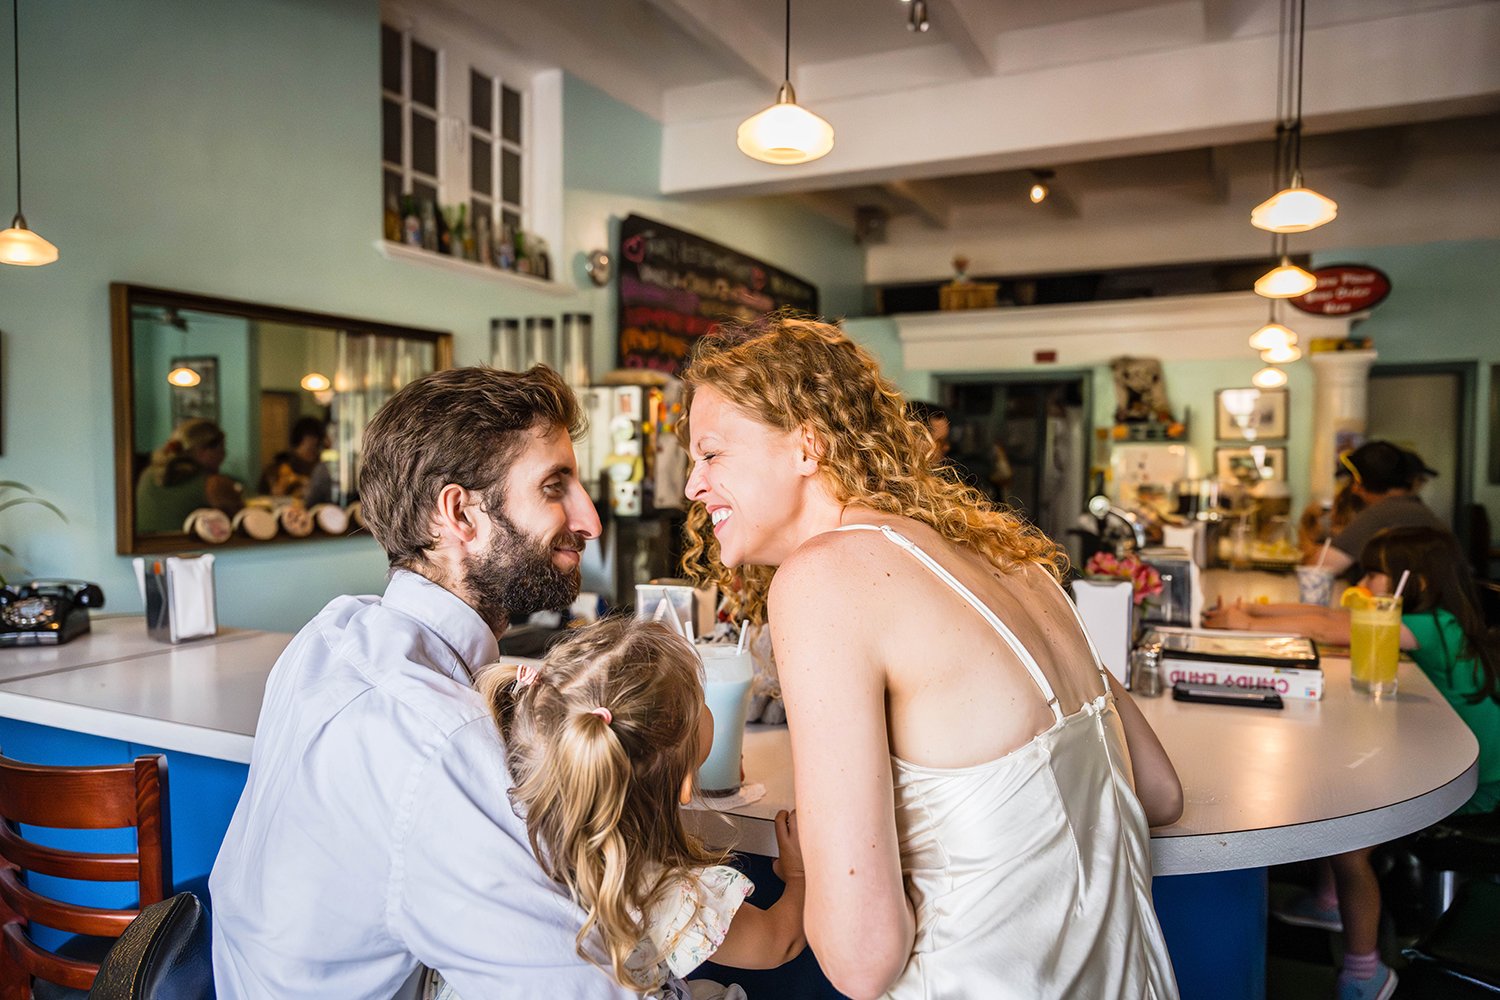 A mother, father, daughter on their elopement day share a vibrant blue Cotton Candy milkshake at the corner of the bar in Pop's Ice Cream and Soda Bar in Grandin Village in Roanoke, Virginia.